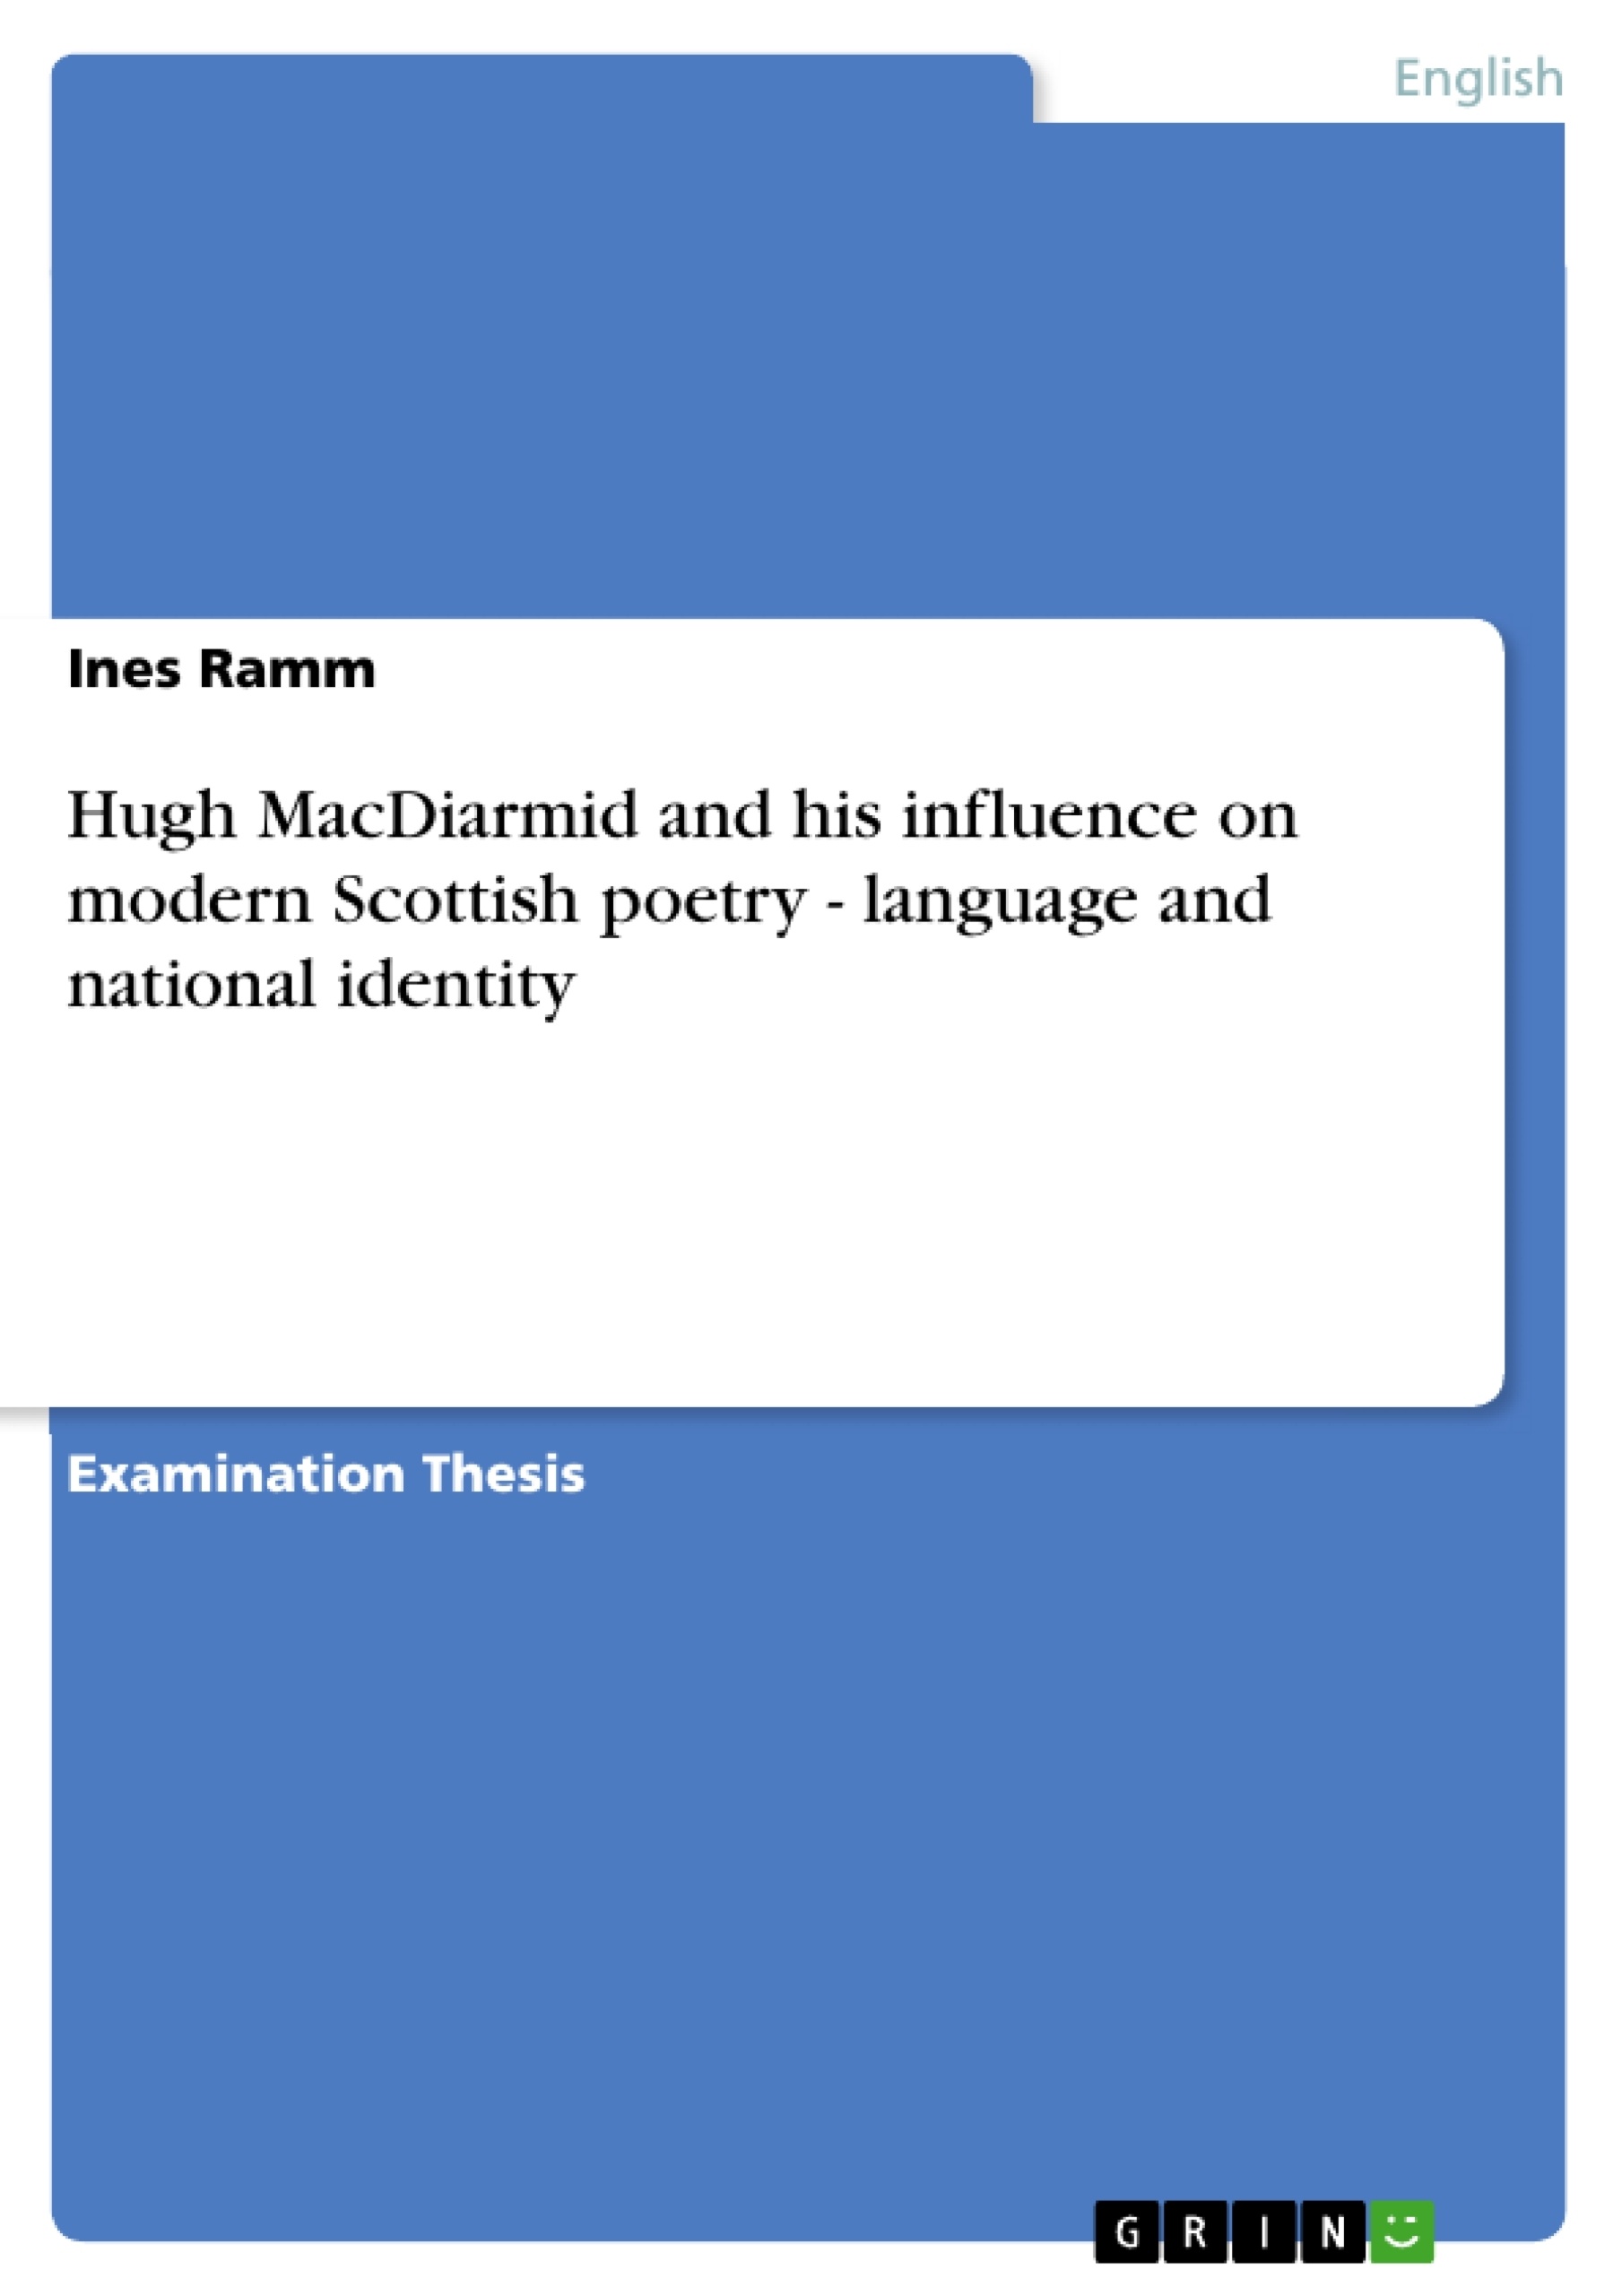 Título: Hugh MacDiarmid and his influence on modern Scottish poetry - language and national identity 